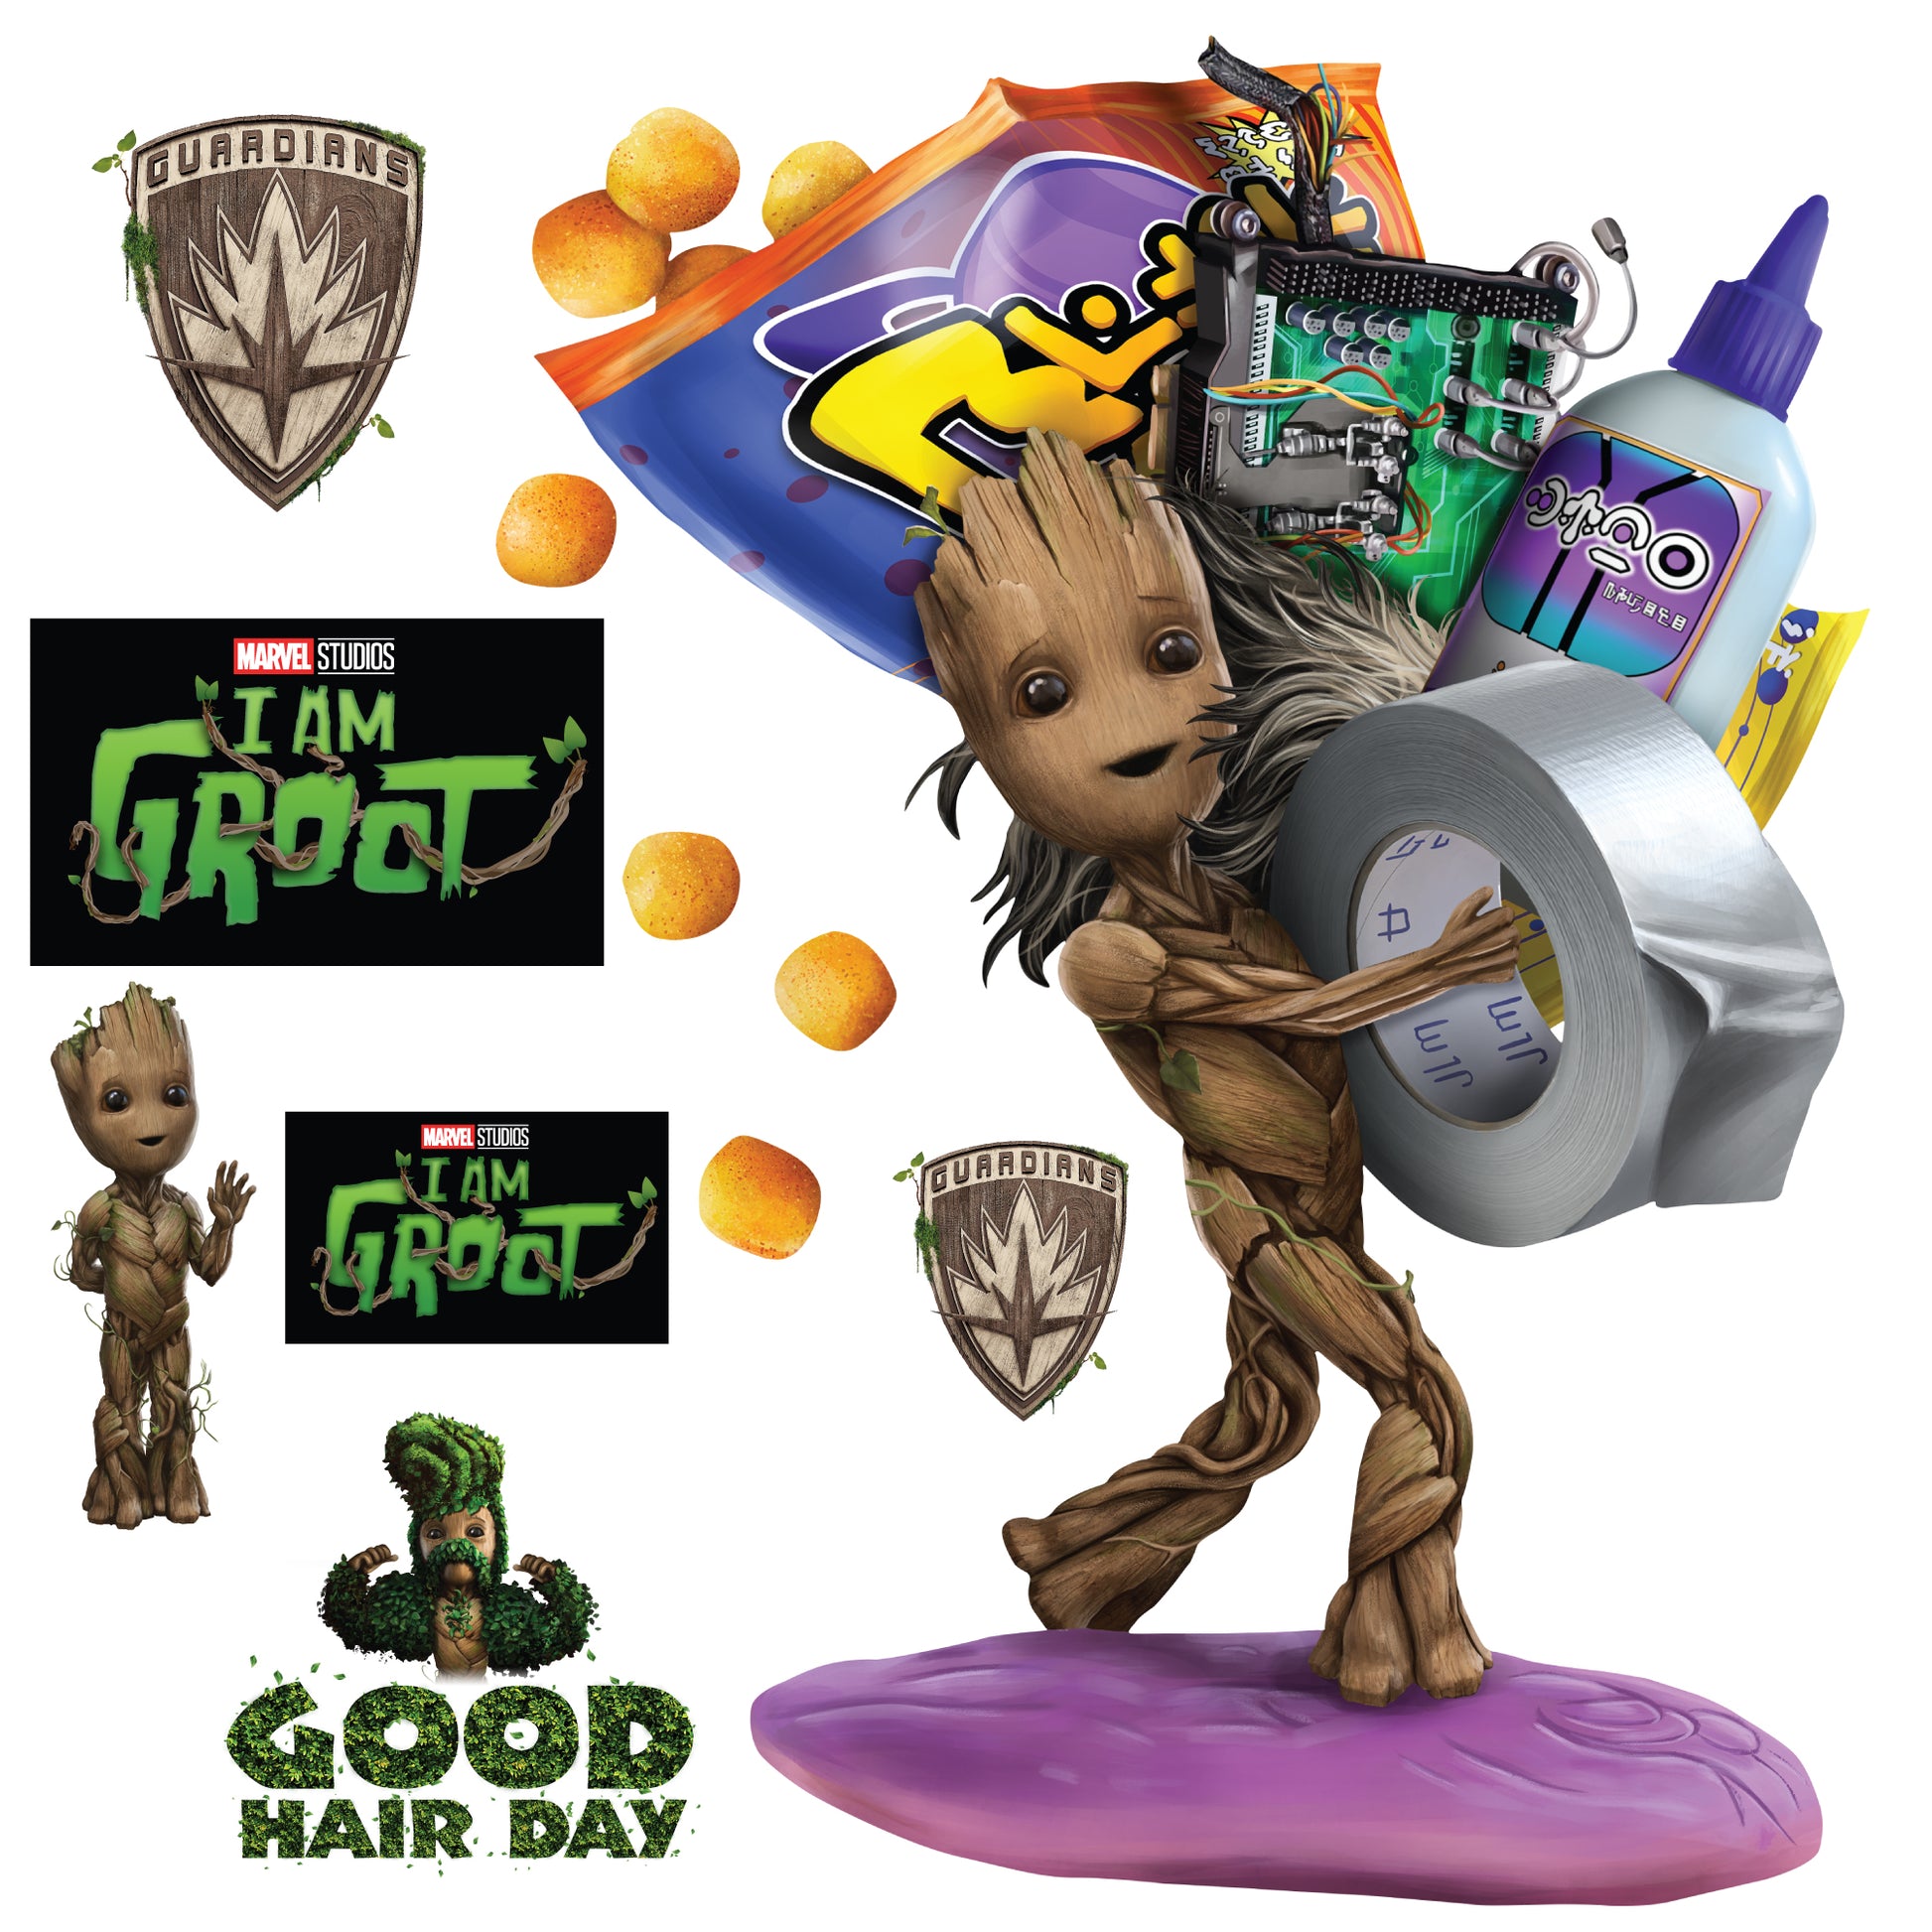 Funko Pop! Marvel: I Am Groot, Groot with Cheese Puffs